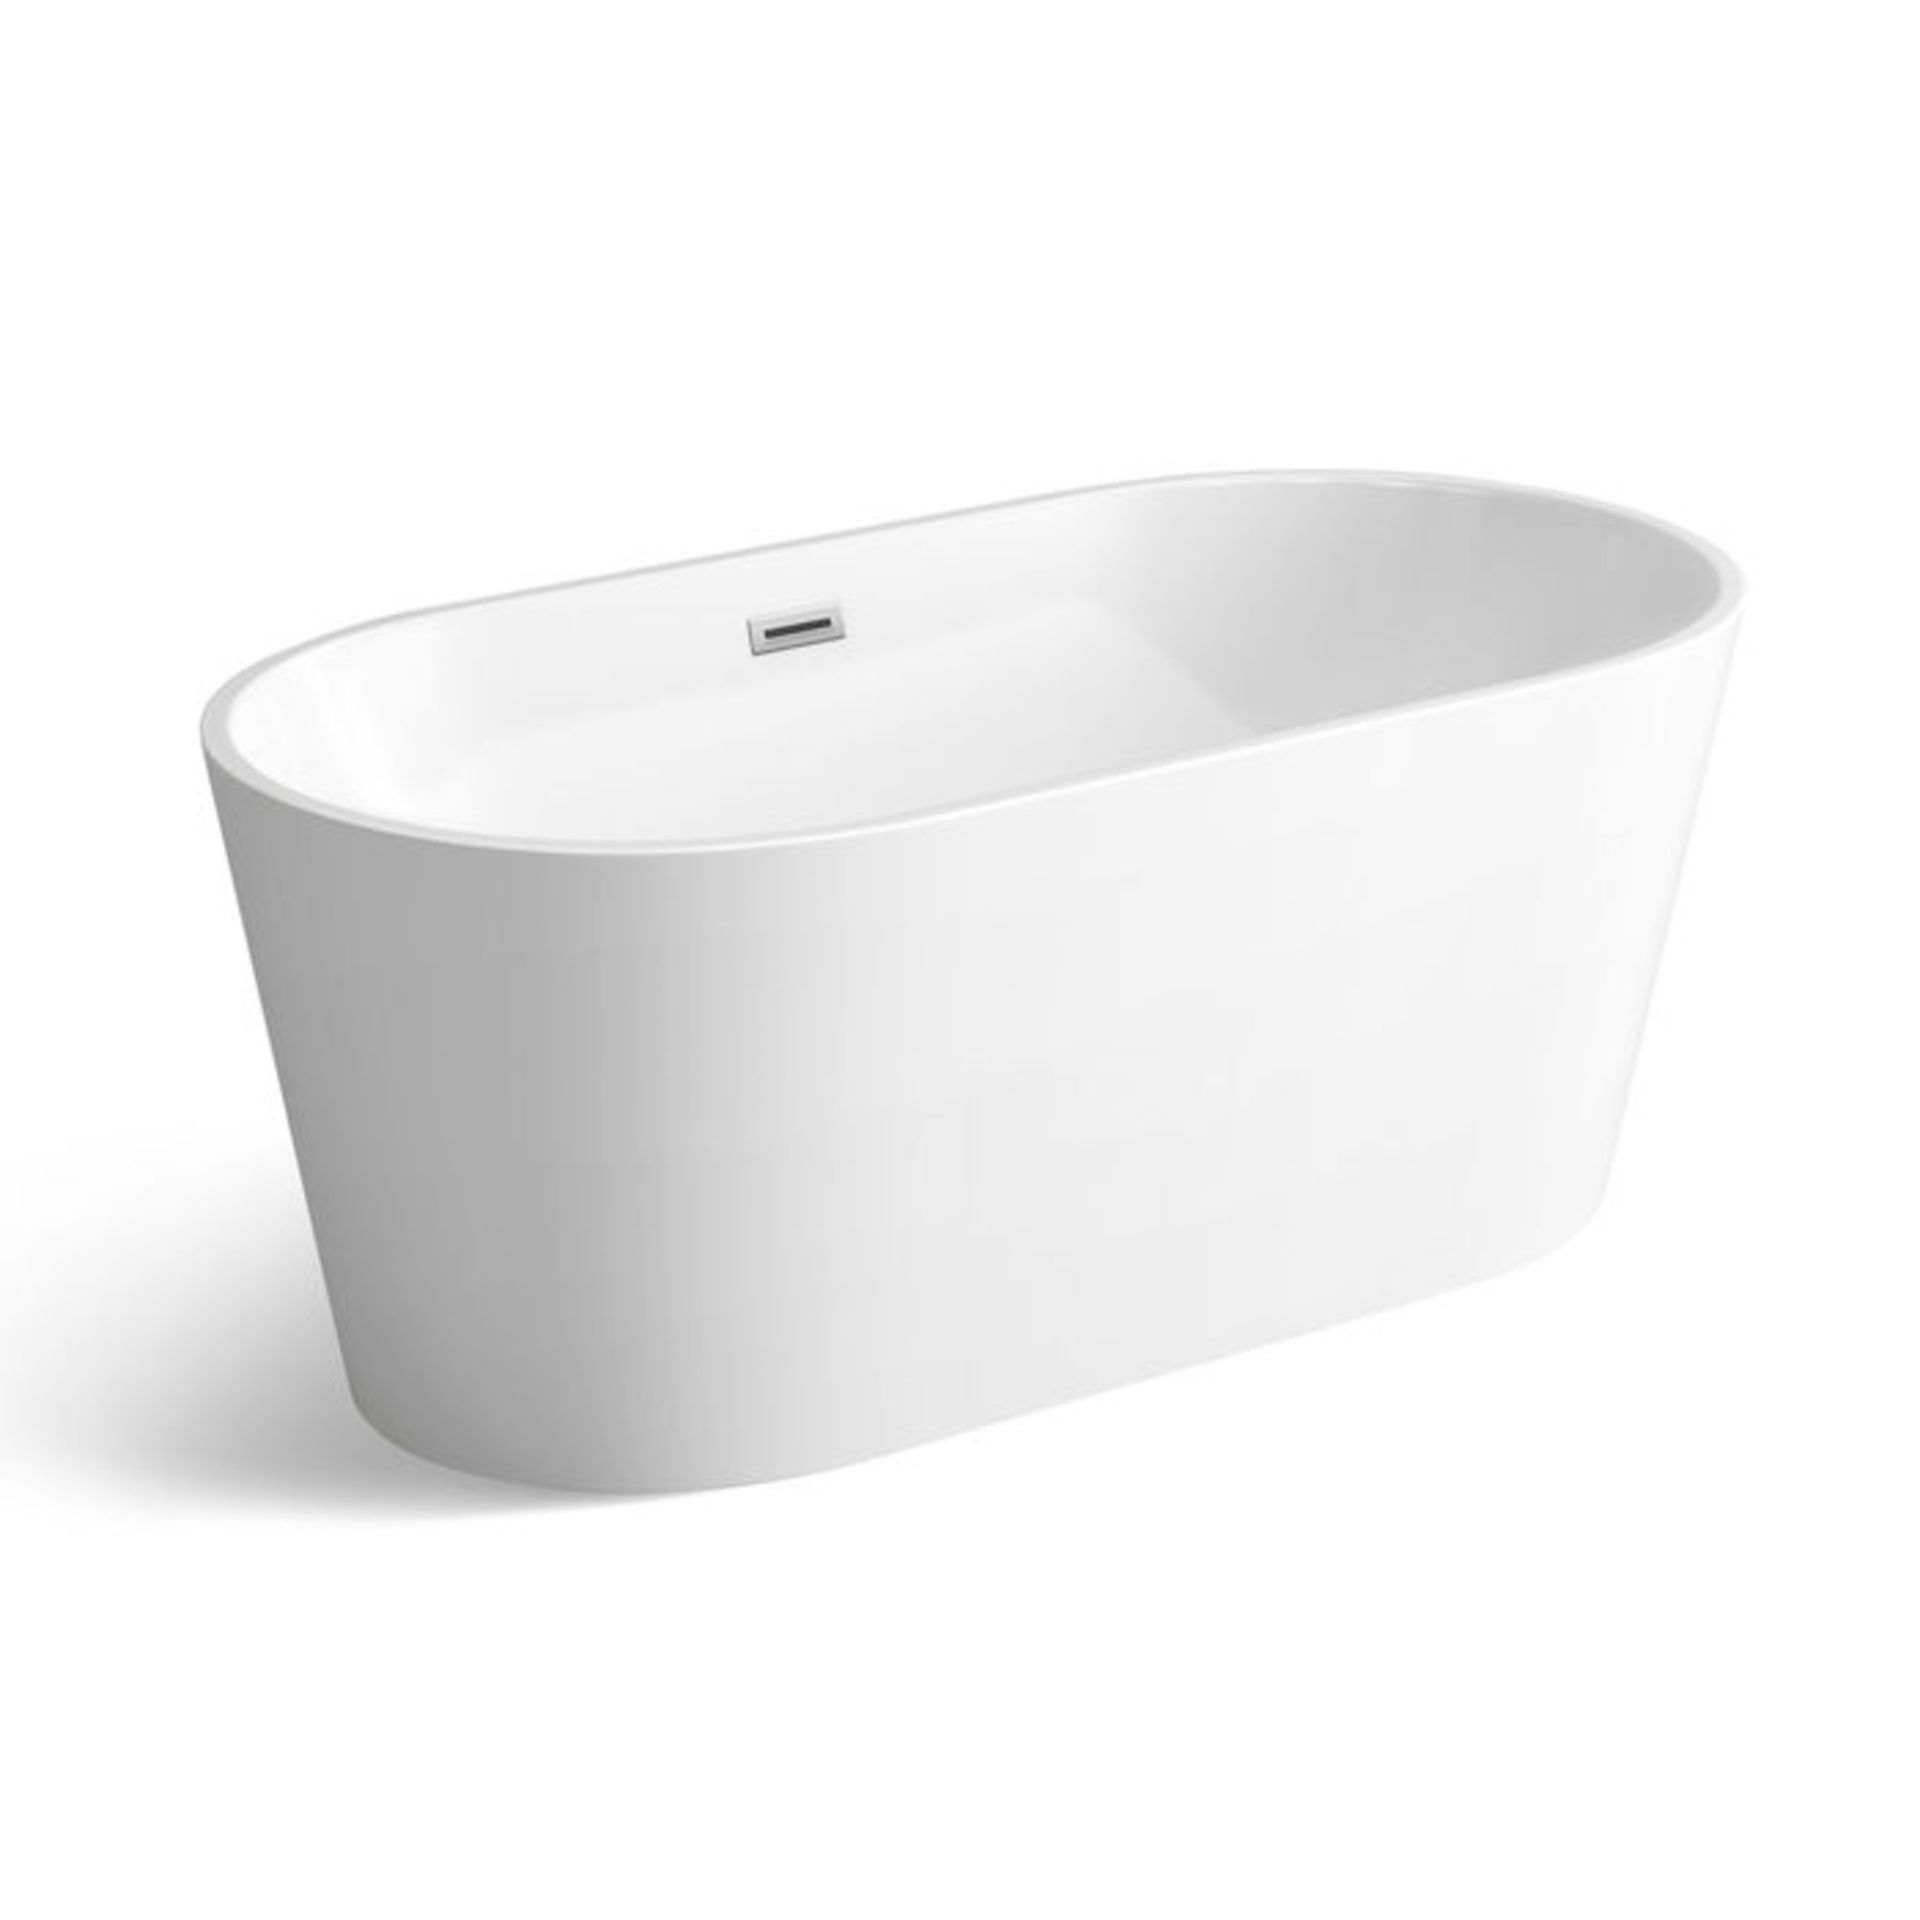 (VN4) 1500x750mm Ava Slimline Freestanding Bath. Expertly crafted, Ava is finished in high gloss and - Image 4 of 6